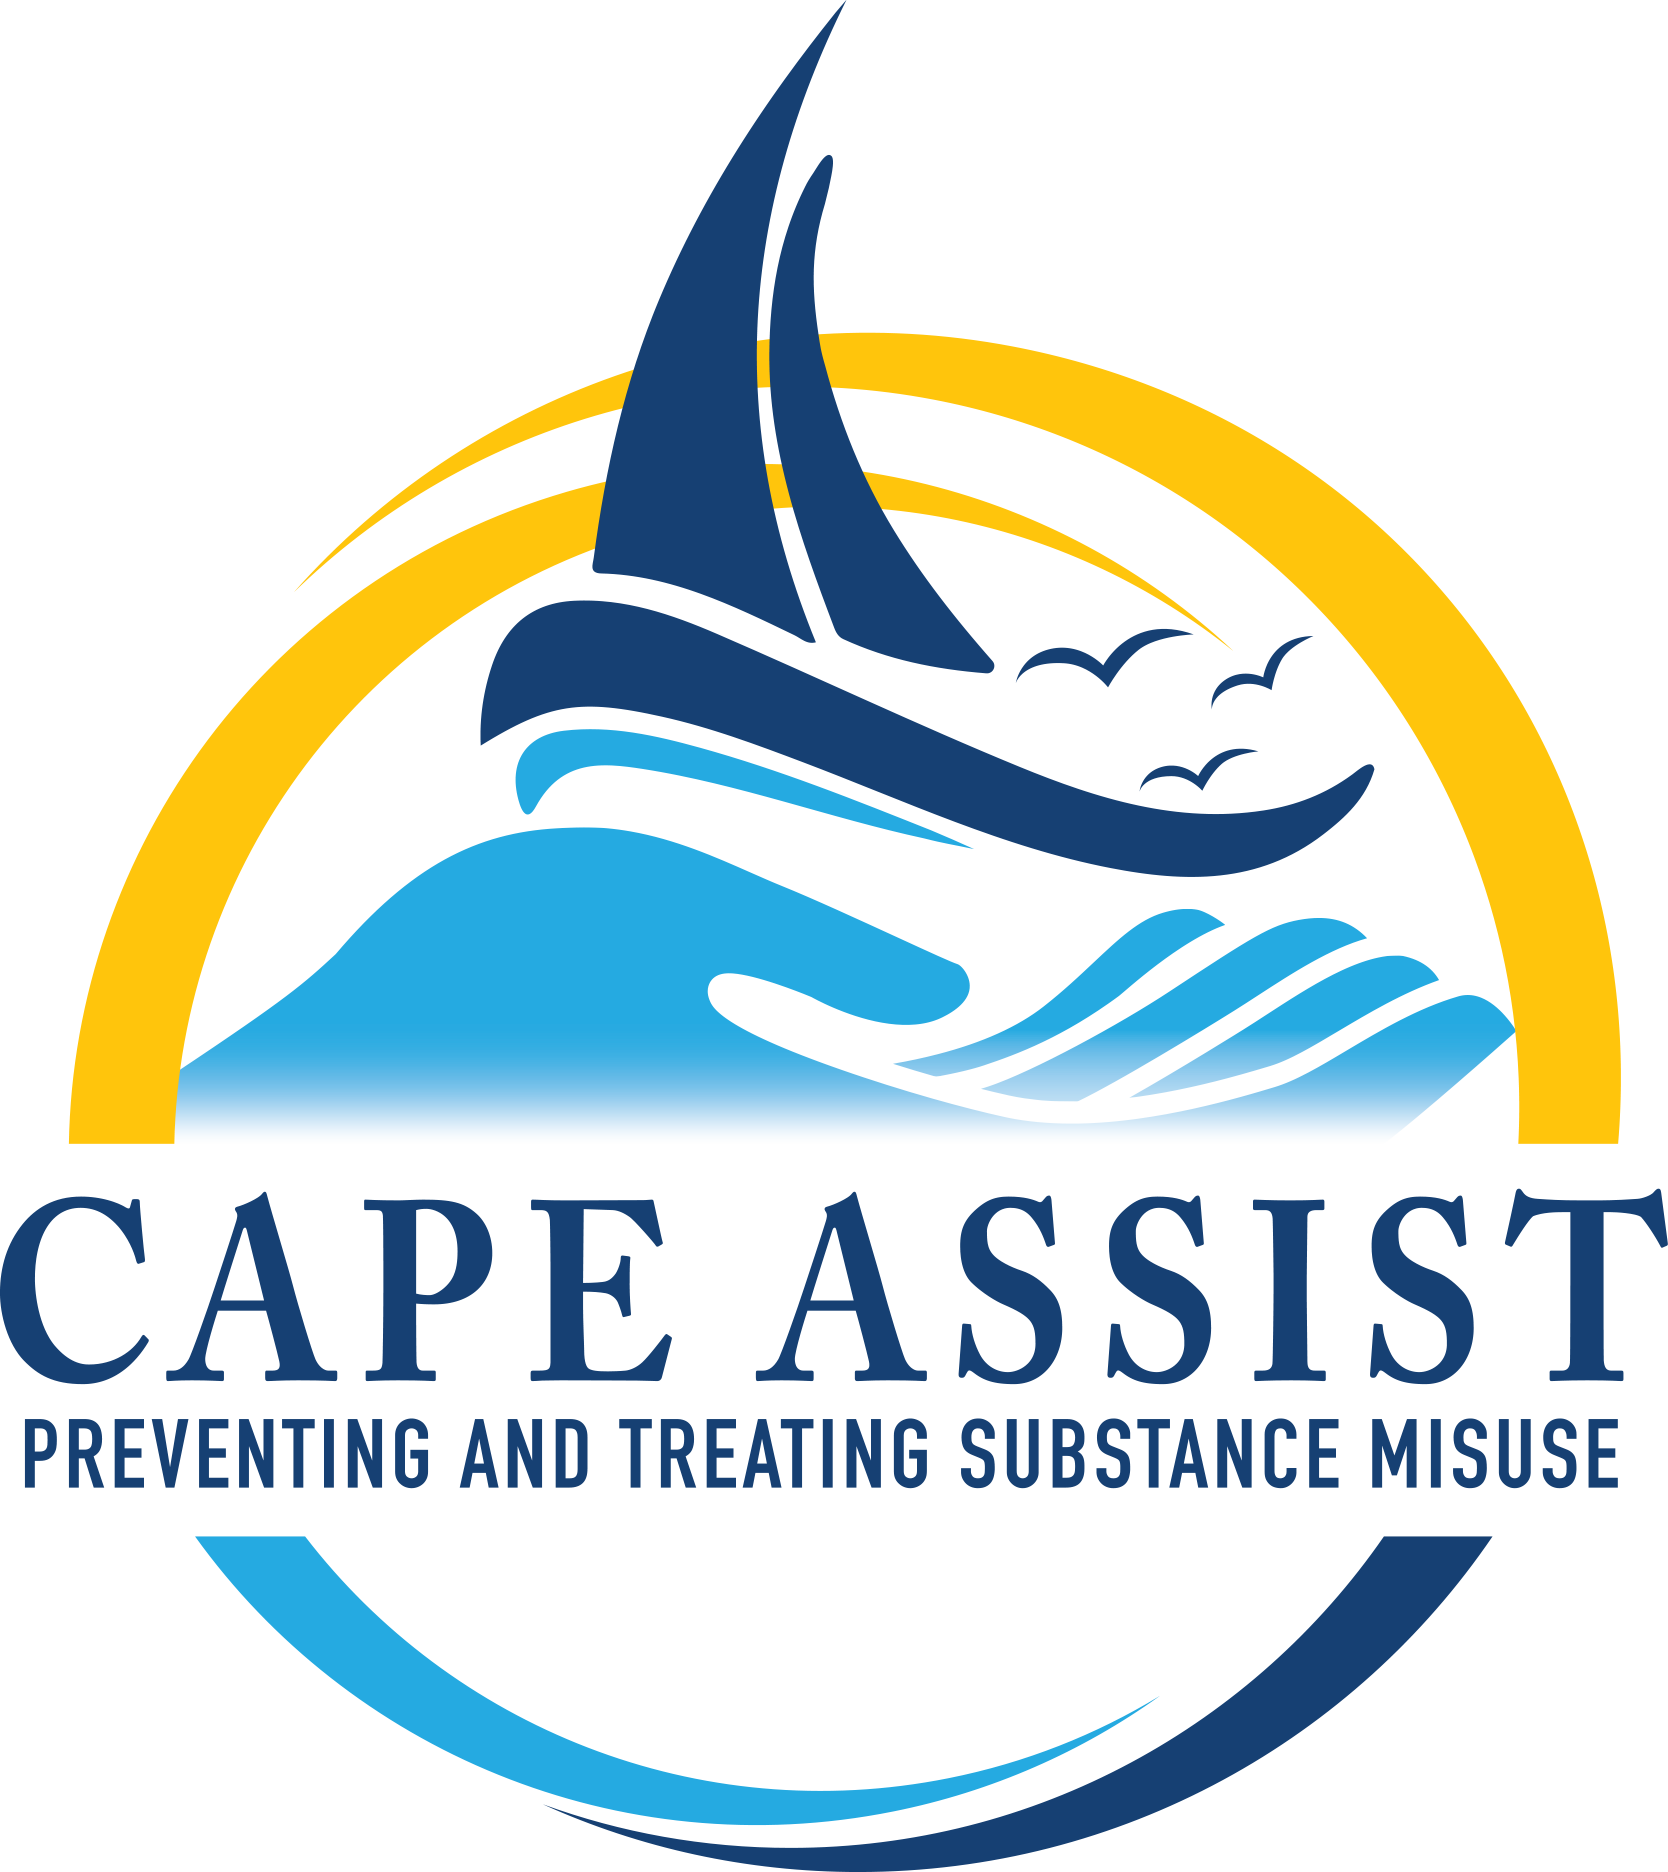 Cape Assist - Preventing and Treating Substance Abuse